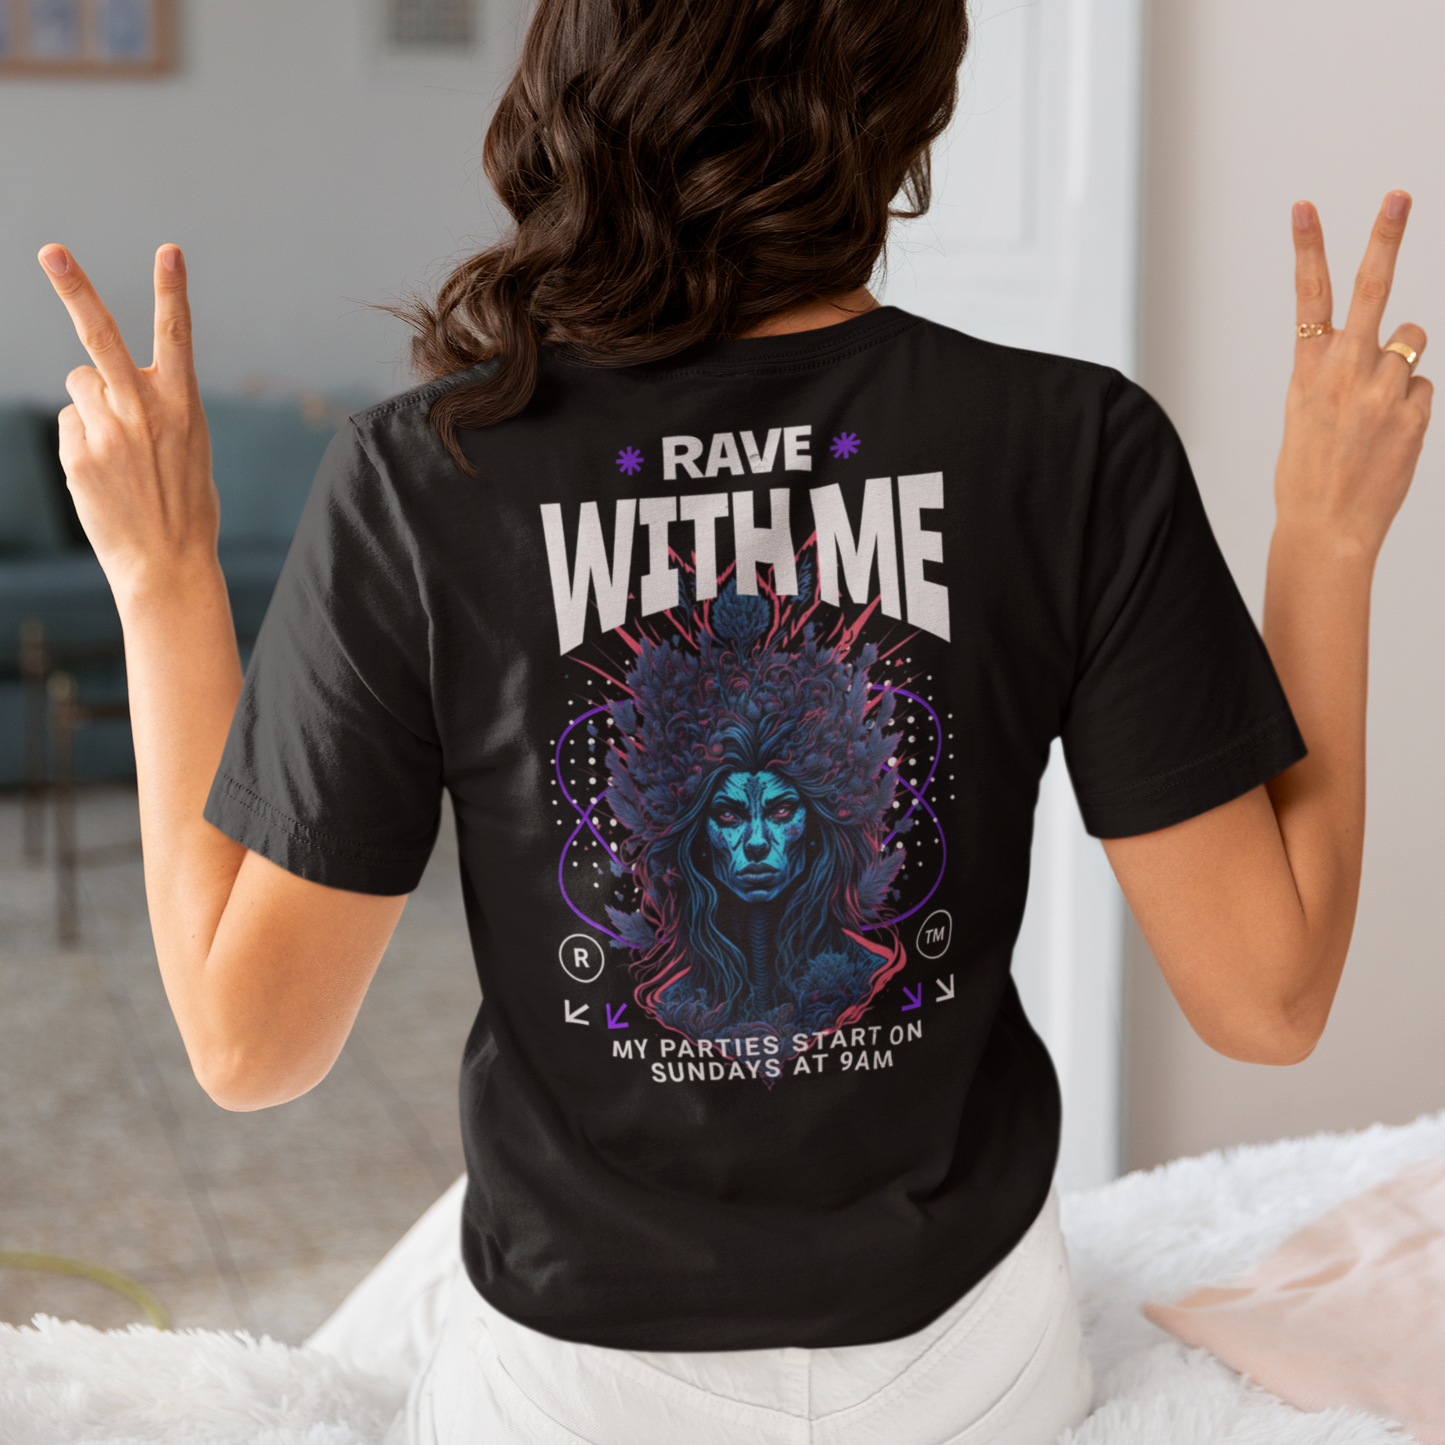 Rave with me -  Unisex T-Shirt